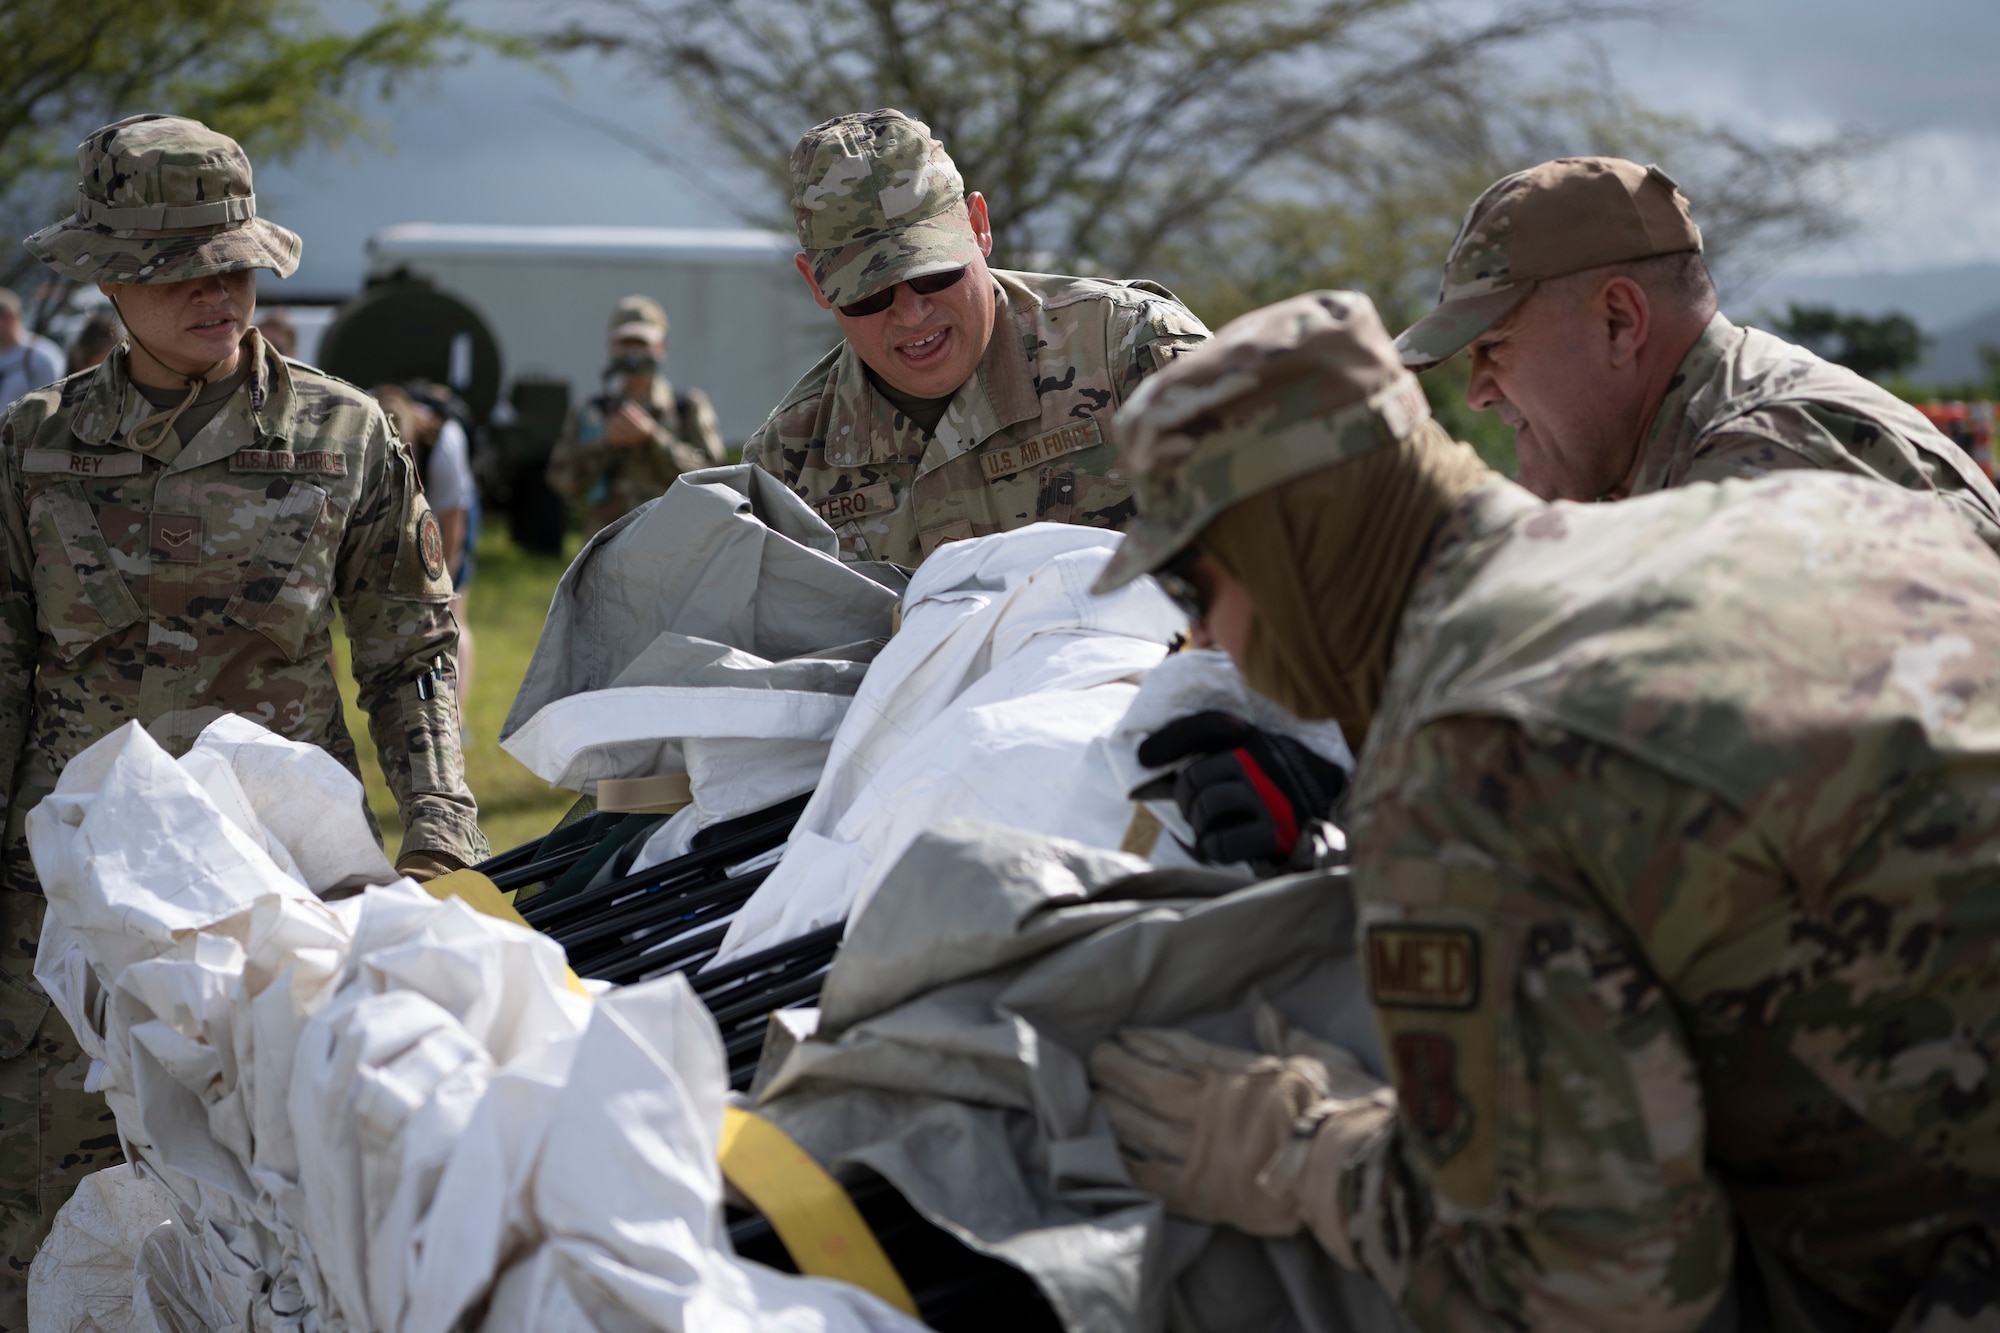 U.S. Airmen assigned to the 156th Medical Group, Detachment 1, unpack a tent during a collective training exercise at Camp Santiago Joint Training Center, Salinas, Puerto Rico, Aug. 10, 2023. The exercise allowed service members assigned to the 156th Medical Group, 123rd Medical Group and the Puerto Rico Army National Guard to exchange knowledge and implement the National Guard CBRN Response Enterprise Information Management System, which assists with accelerating data collection from search and extraction teams in emergency events. (U.S. Air National Guard photo by Master Sgt. Rafael D. Rosa)